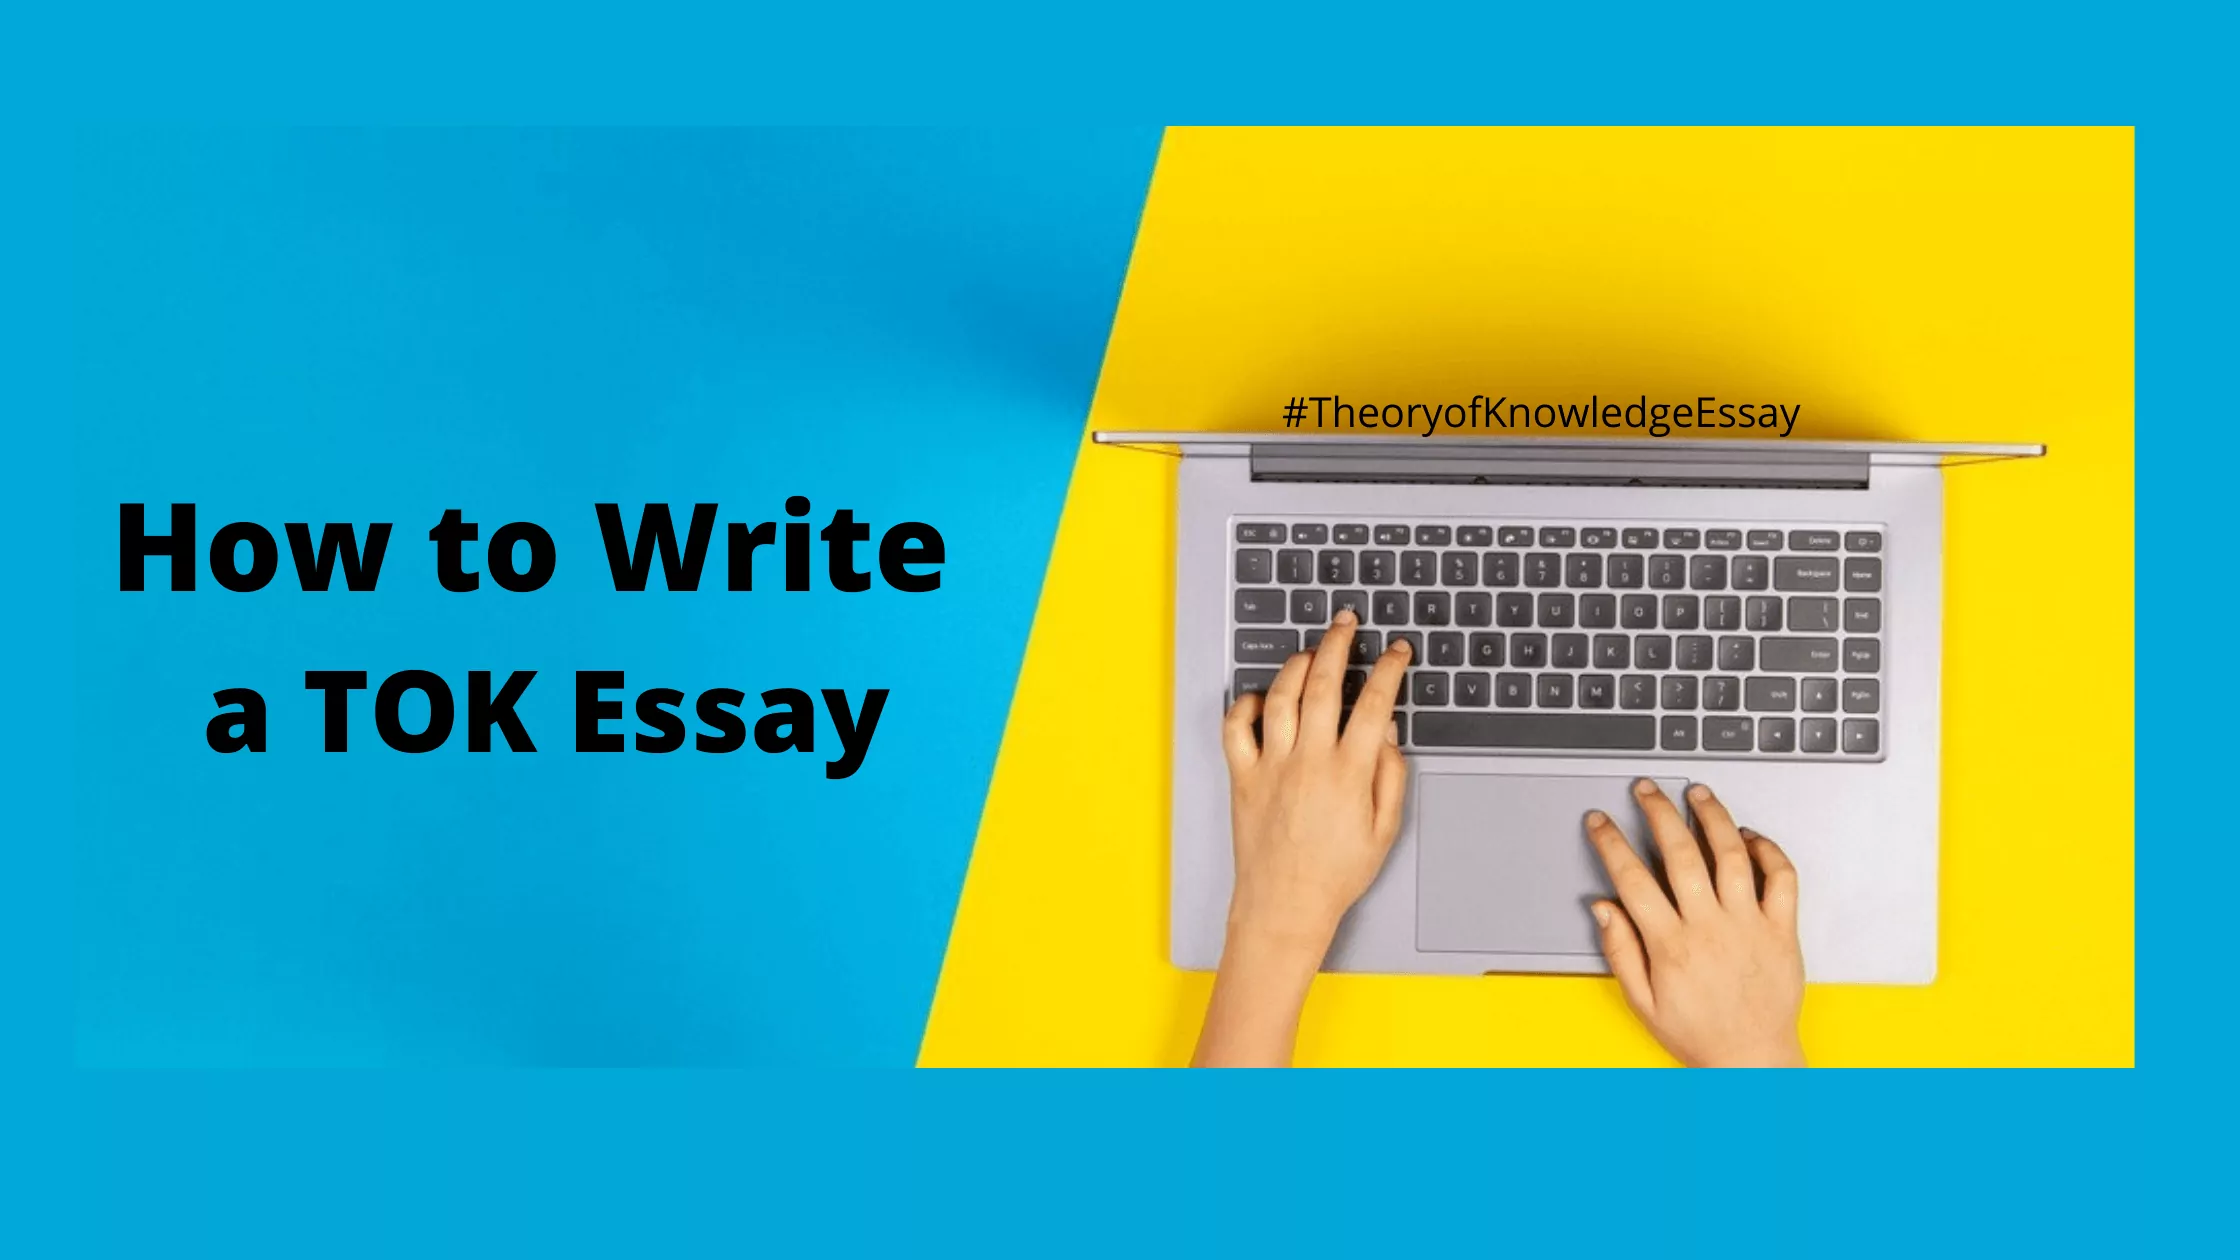 How to write a TOK essay and score the best grade